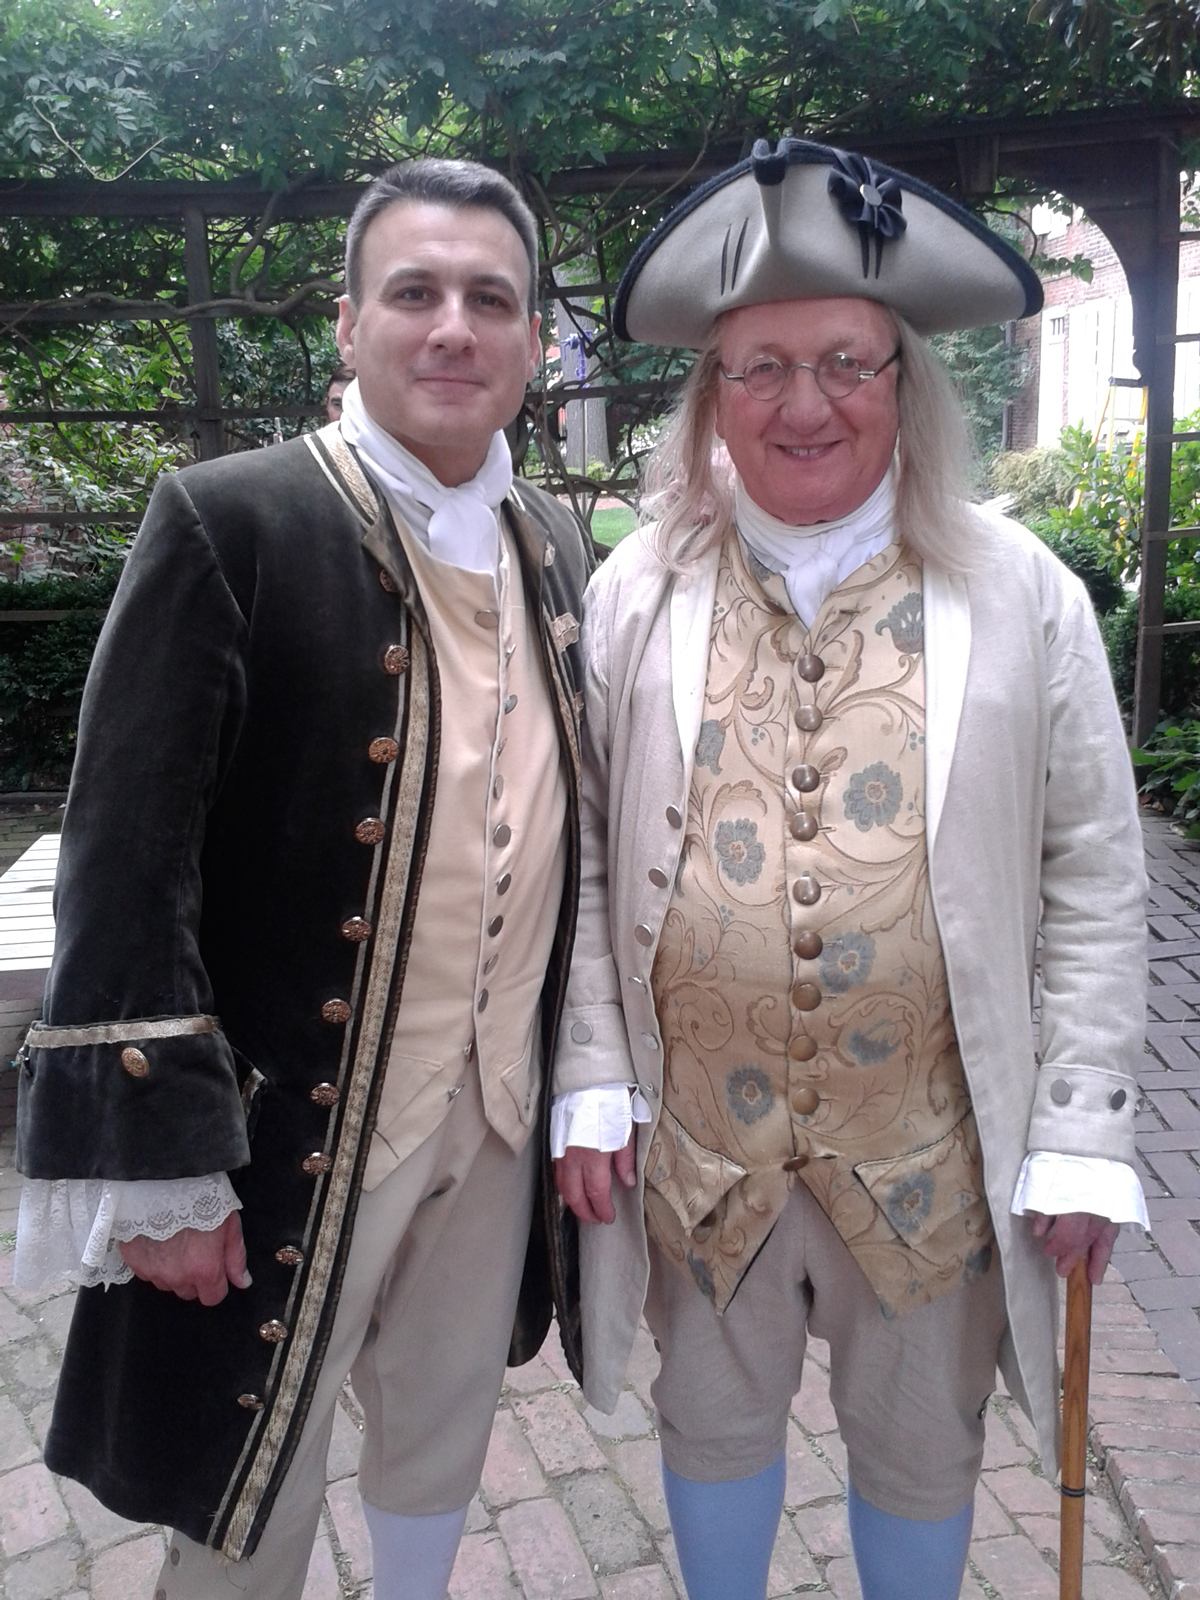 Noel Ramos portrays a Colonial Delegate, posing with Ben Franklin as they attend a meeting.